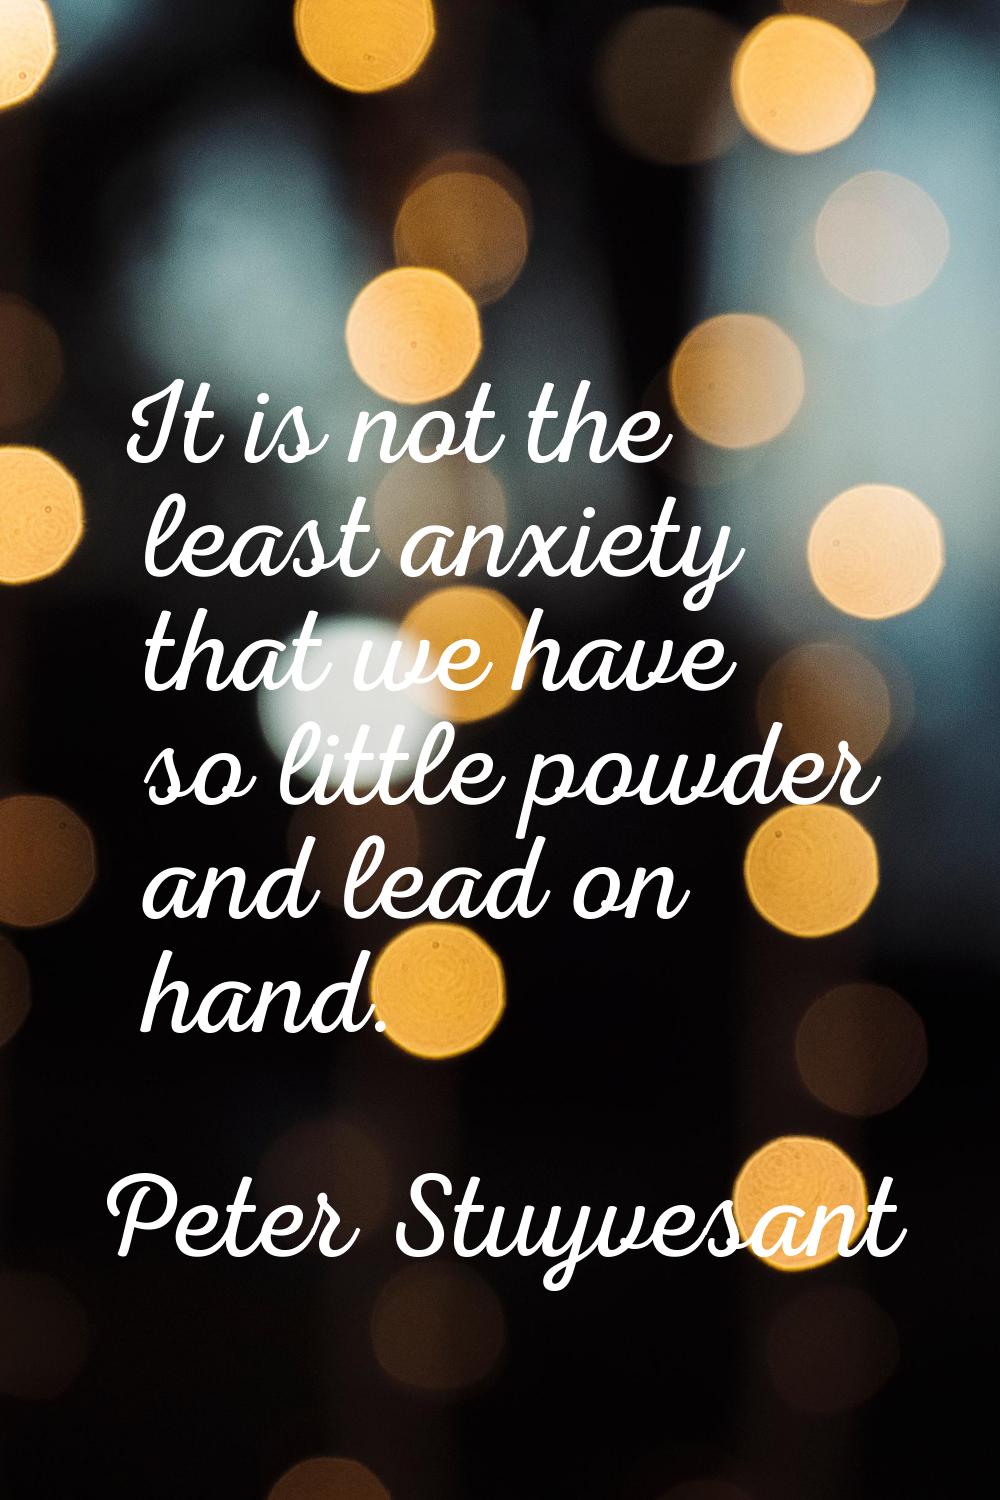 It is not the least anxiety that we have so little powder and lead on hand.